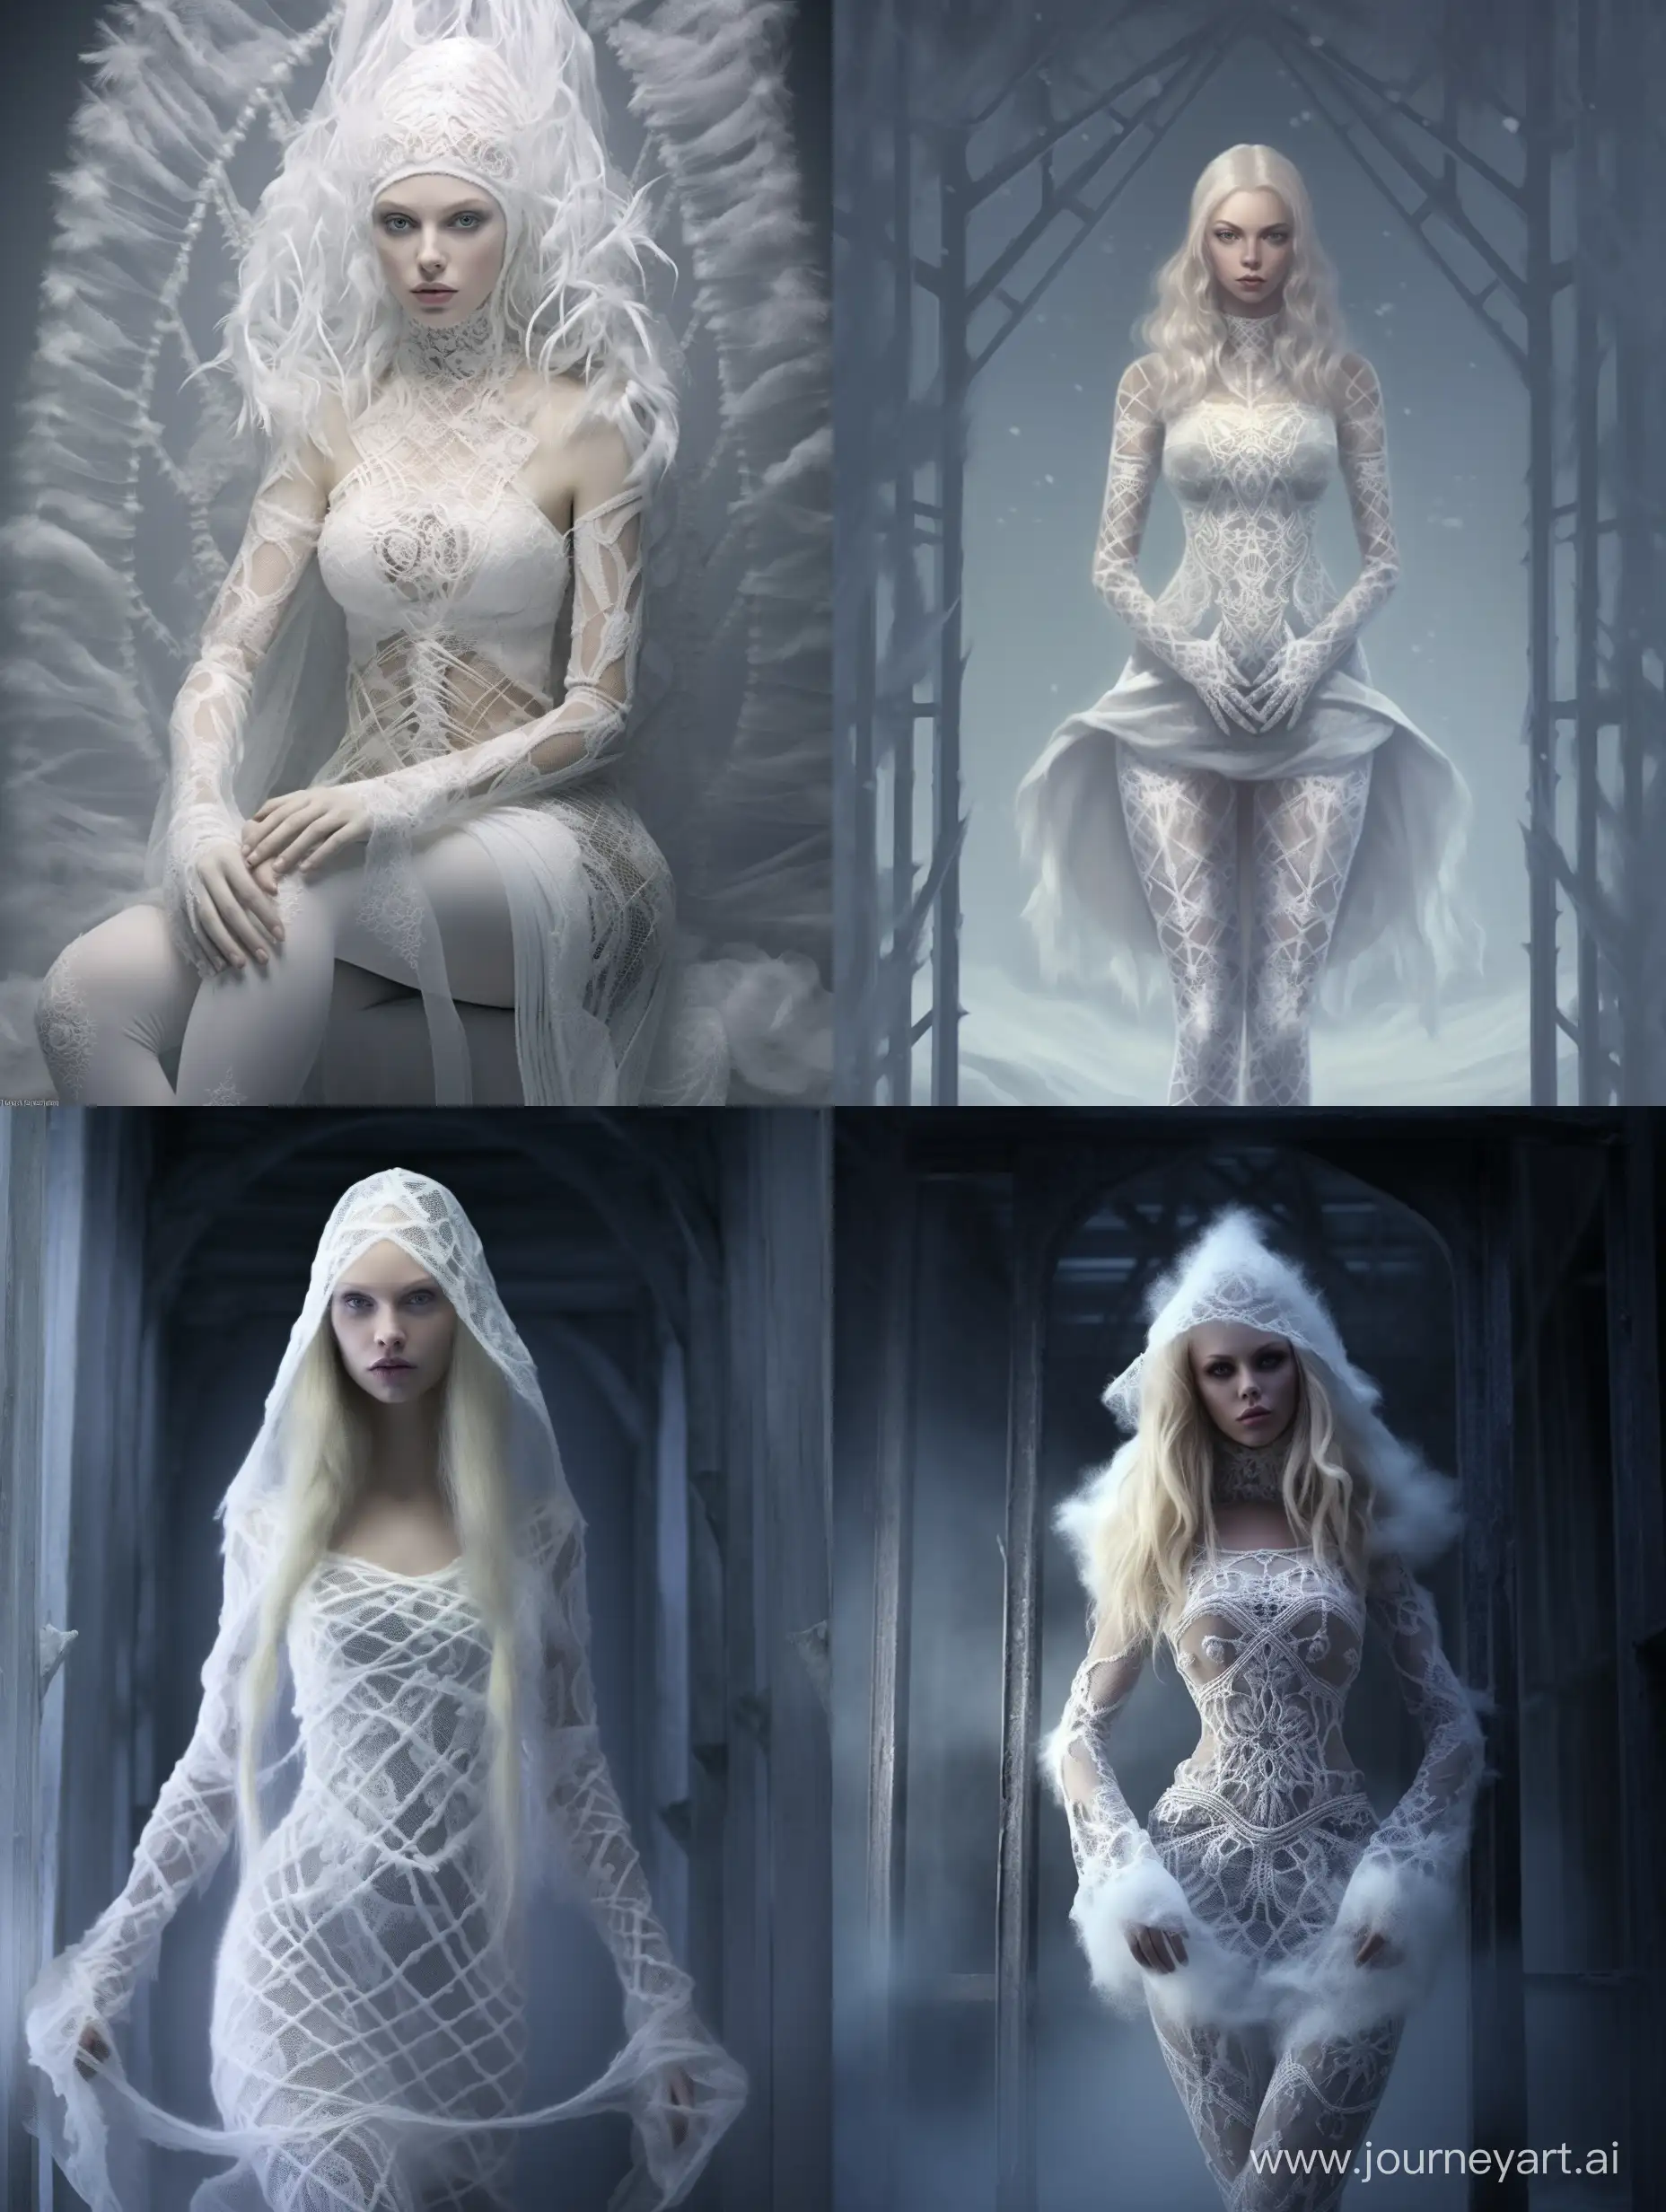 Snow-Maiden-Villain-in-White-Dress-and-Fishnet-Tights